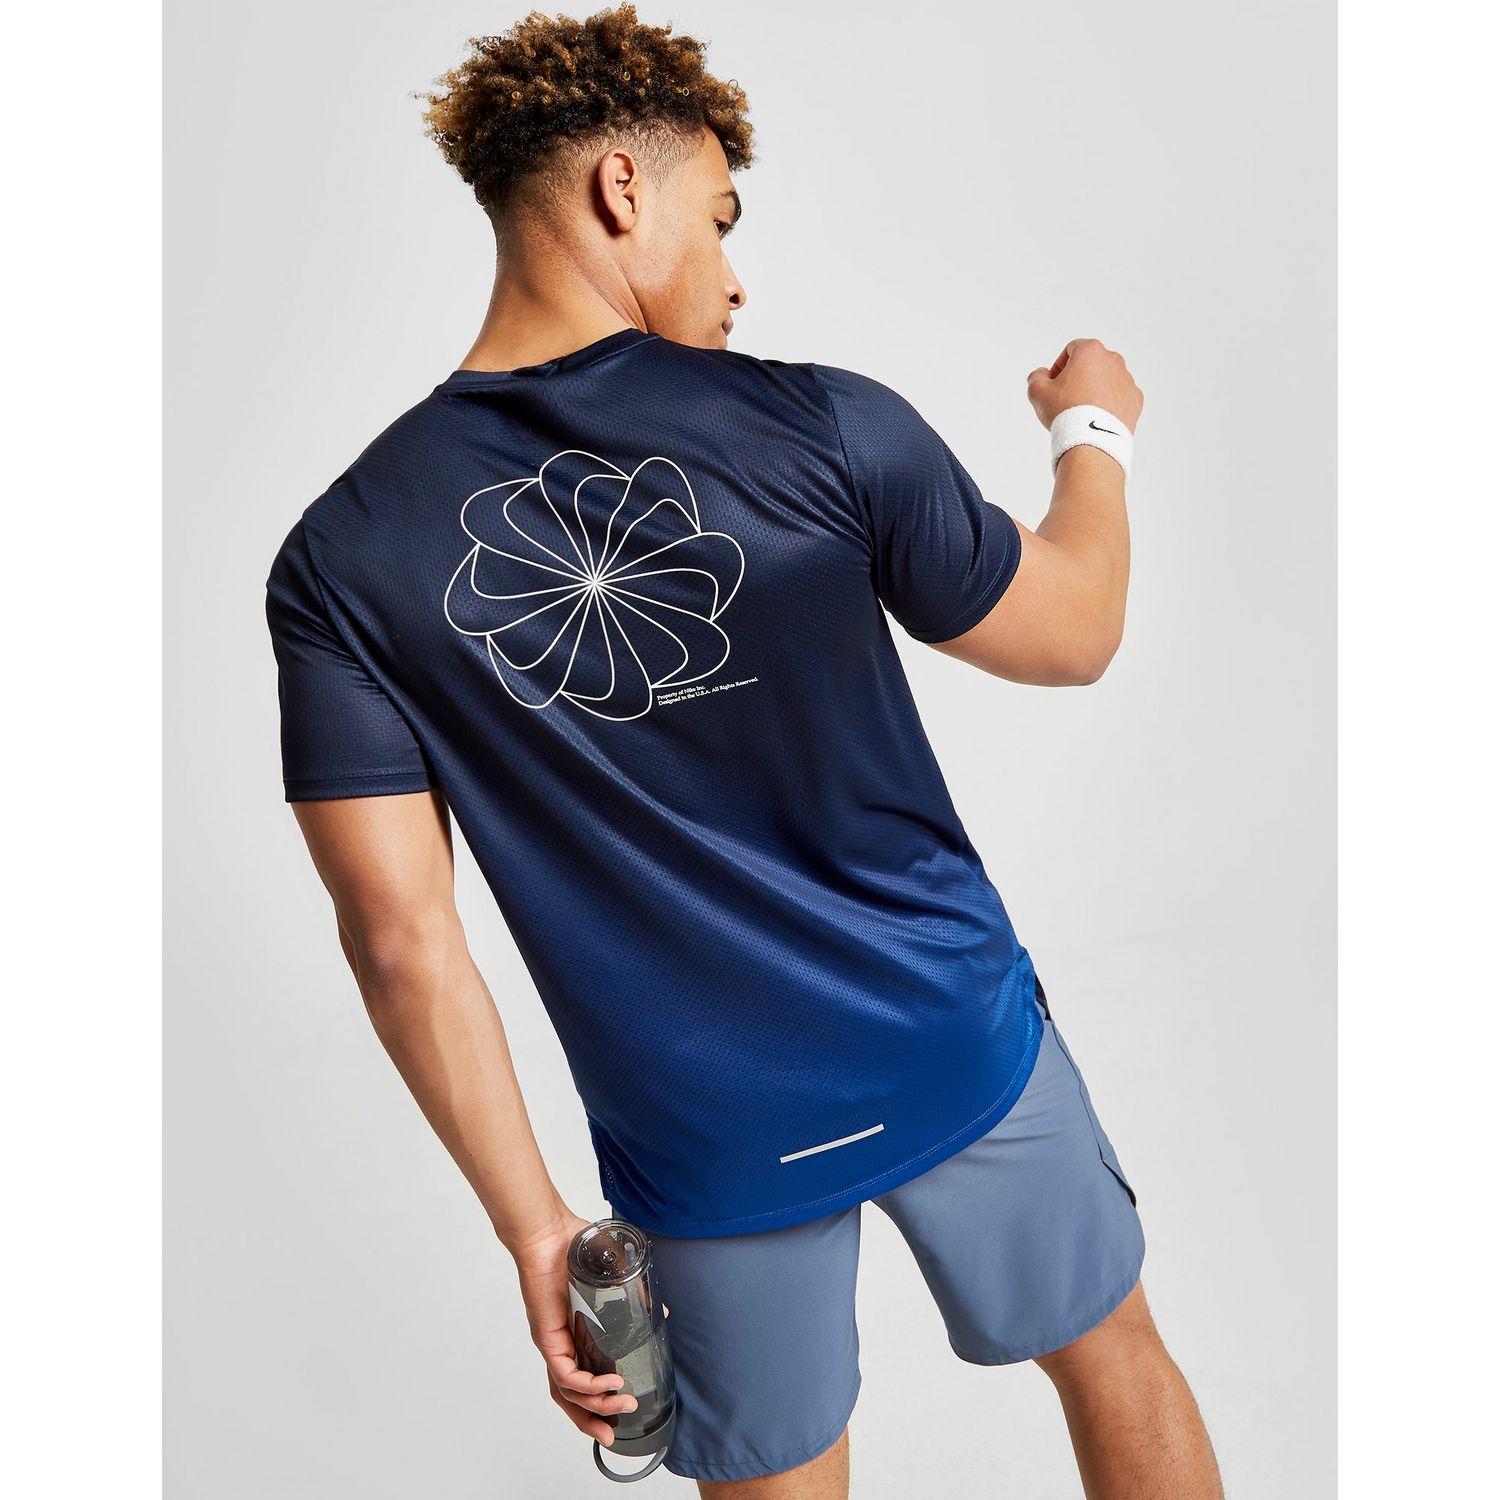 Nike Synthetic Pinwheel Fade T-shirt in Blue for Men - Lyst